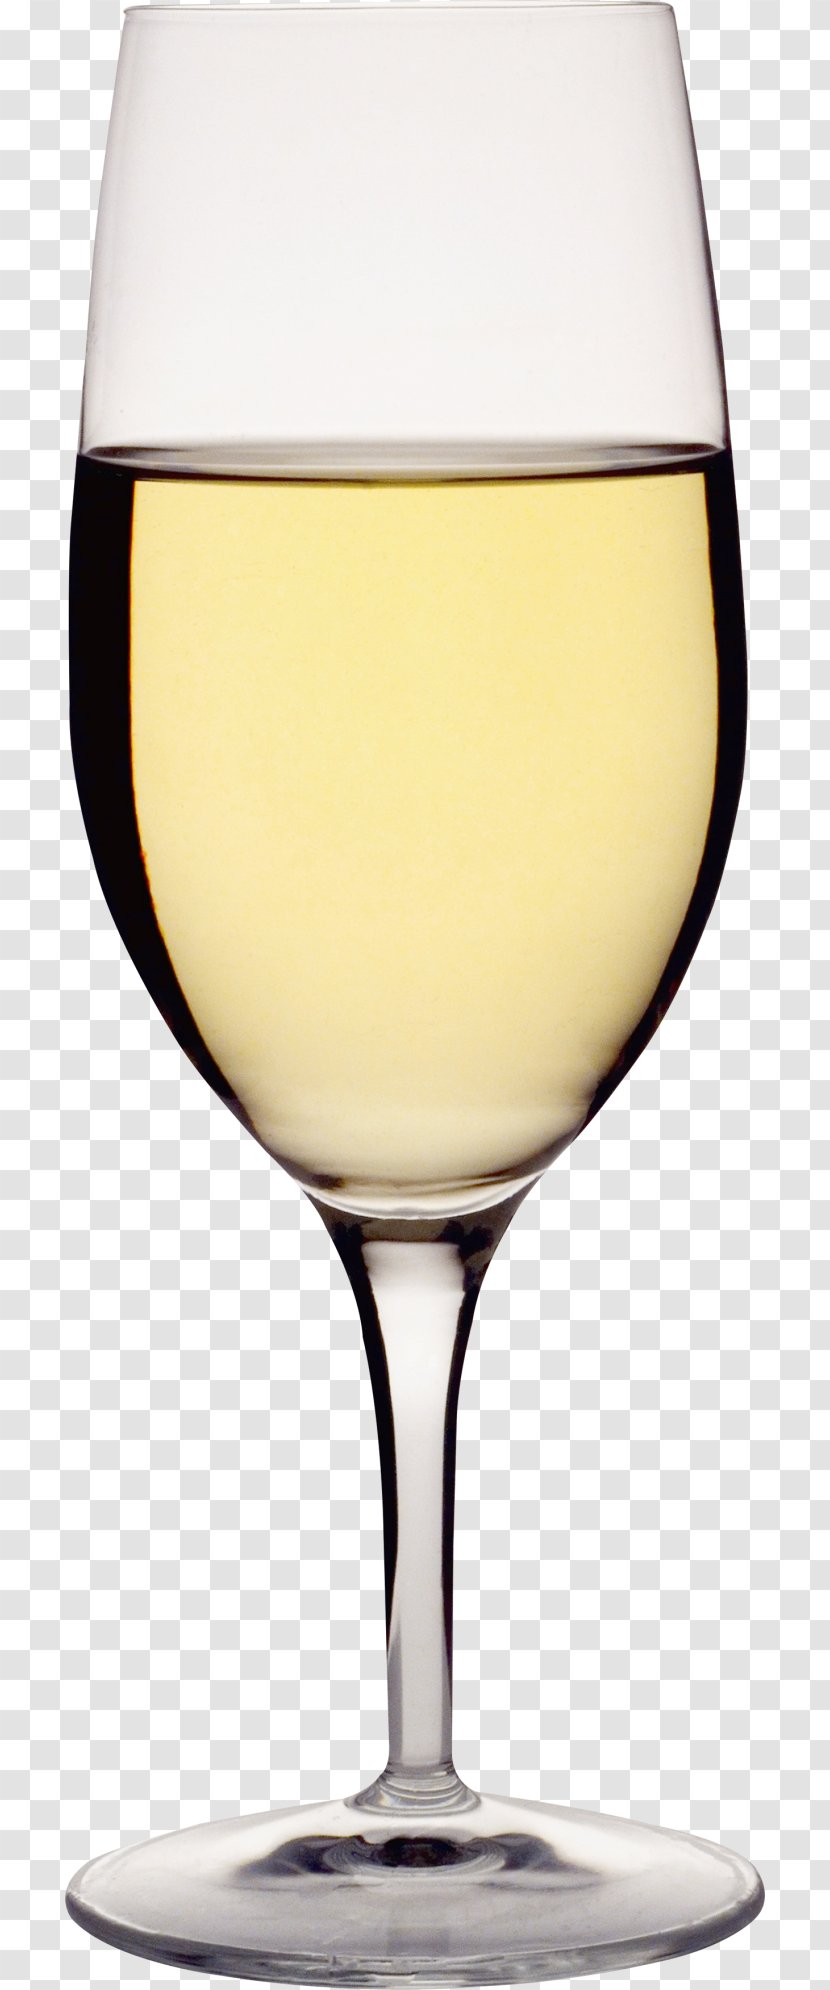 Sparkling Wine Champagne White Glass - And Food Matching Transparent PNG